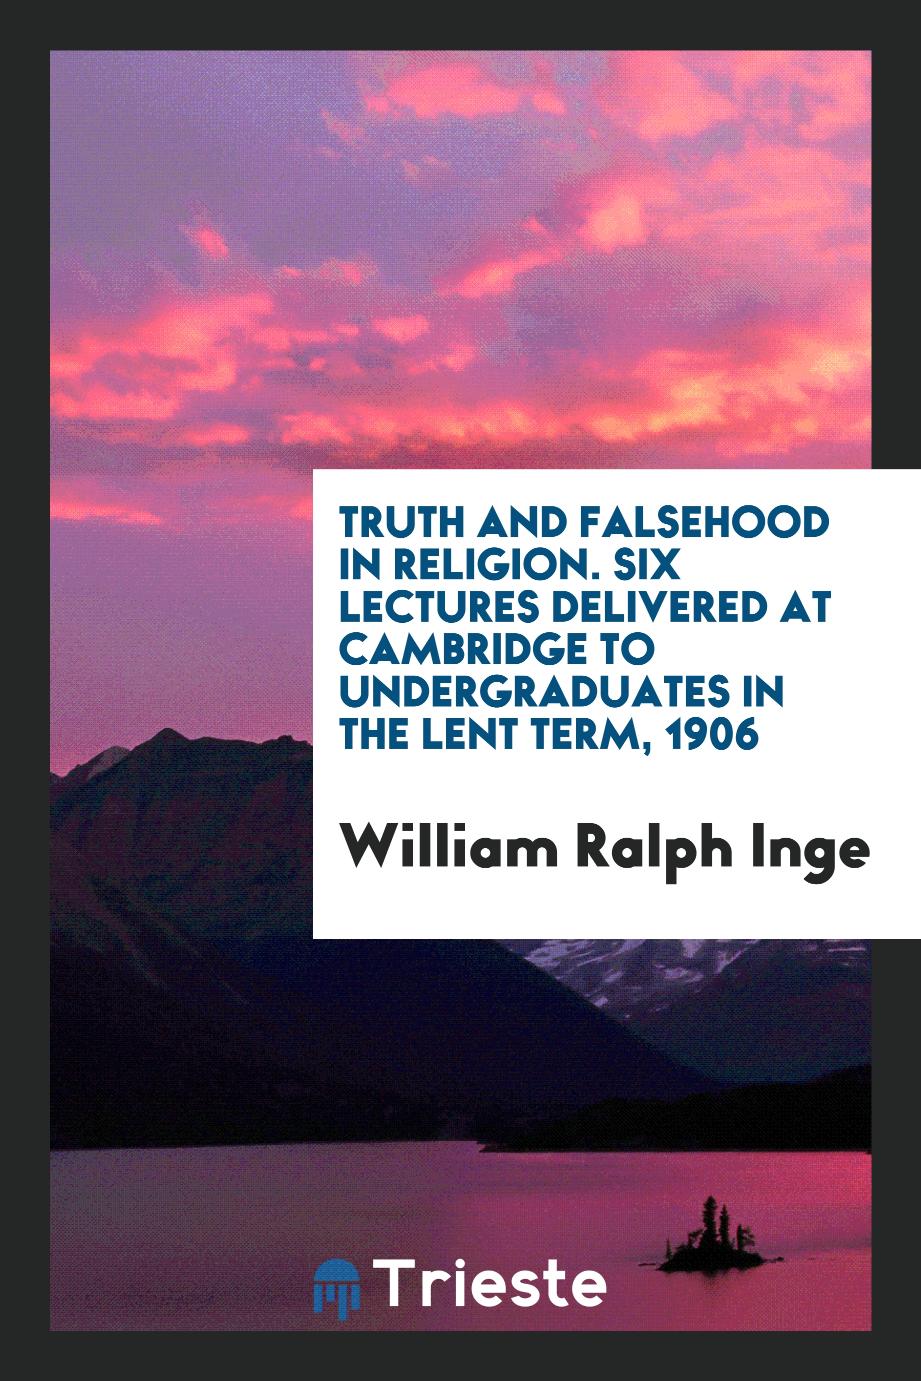 Truth and Falsehood in Religion. Six Lectures Delivered at Cambridge to Undergraduates in the Lent Term, 1906